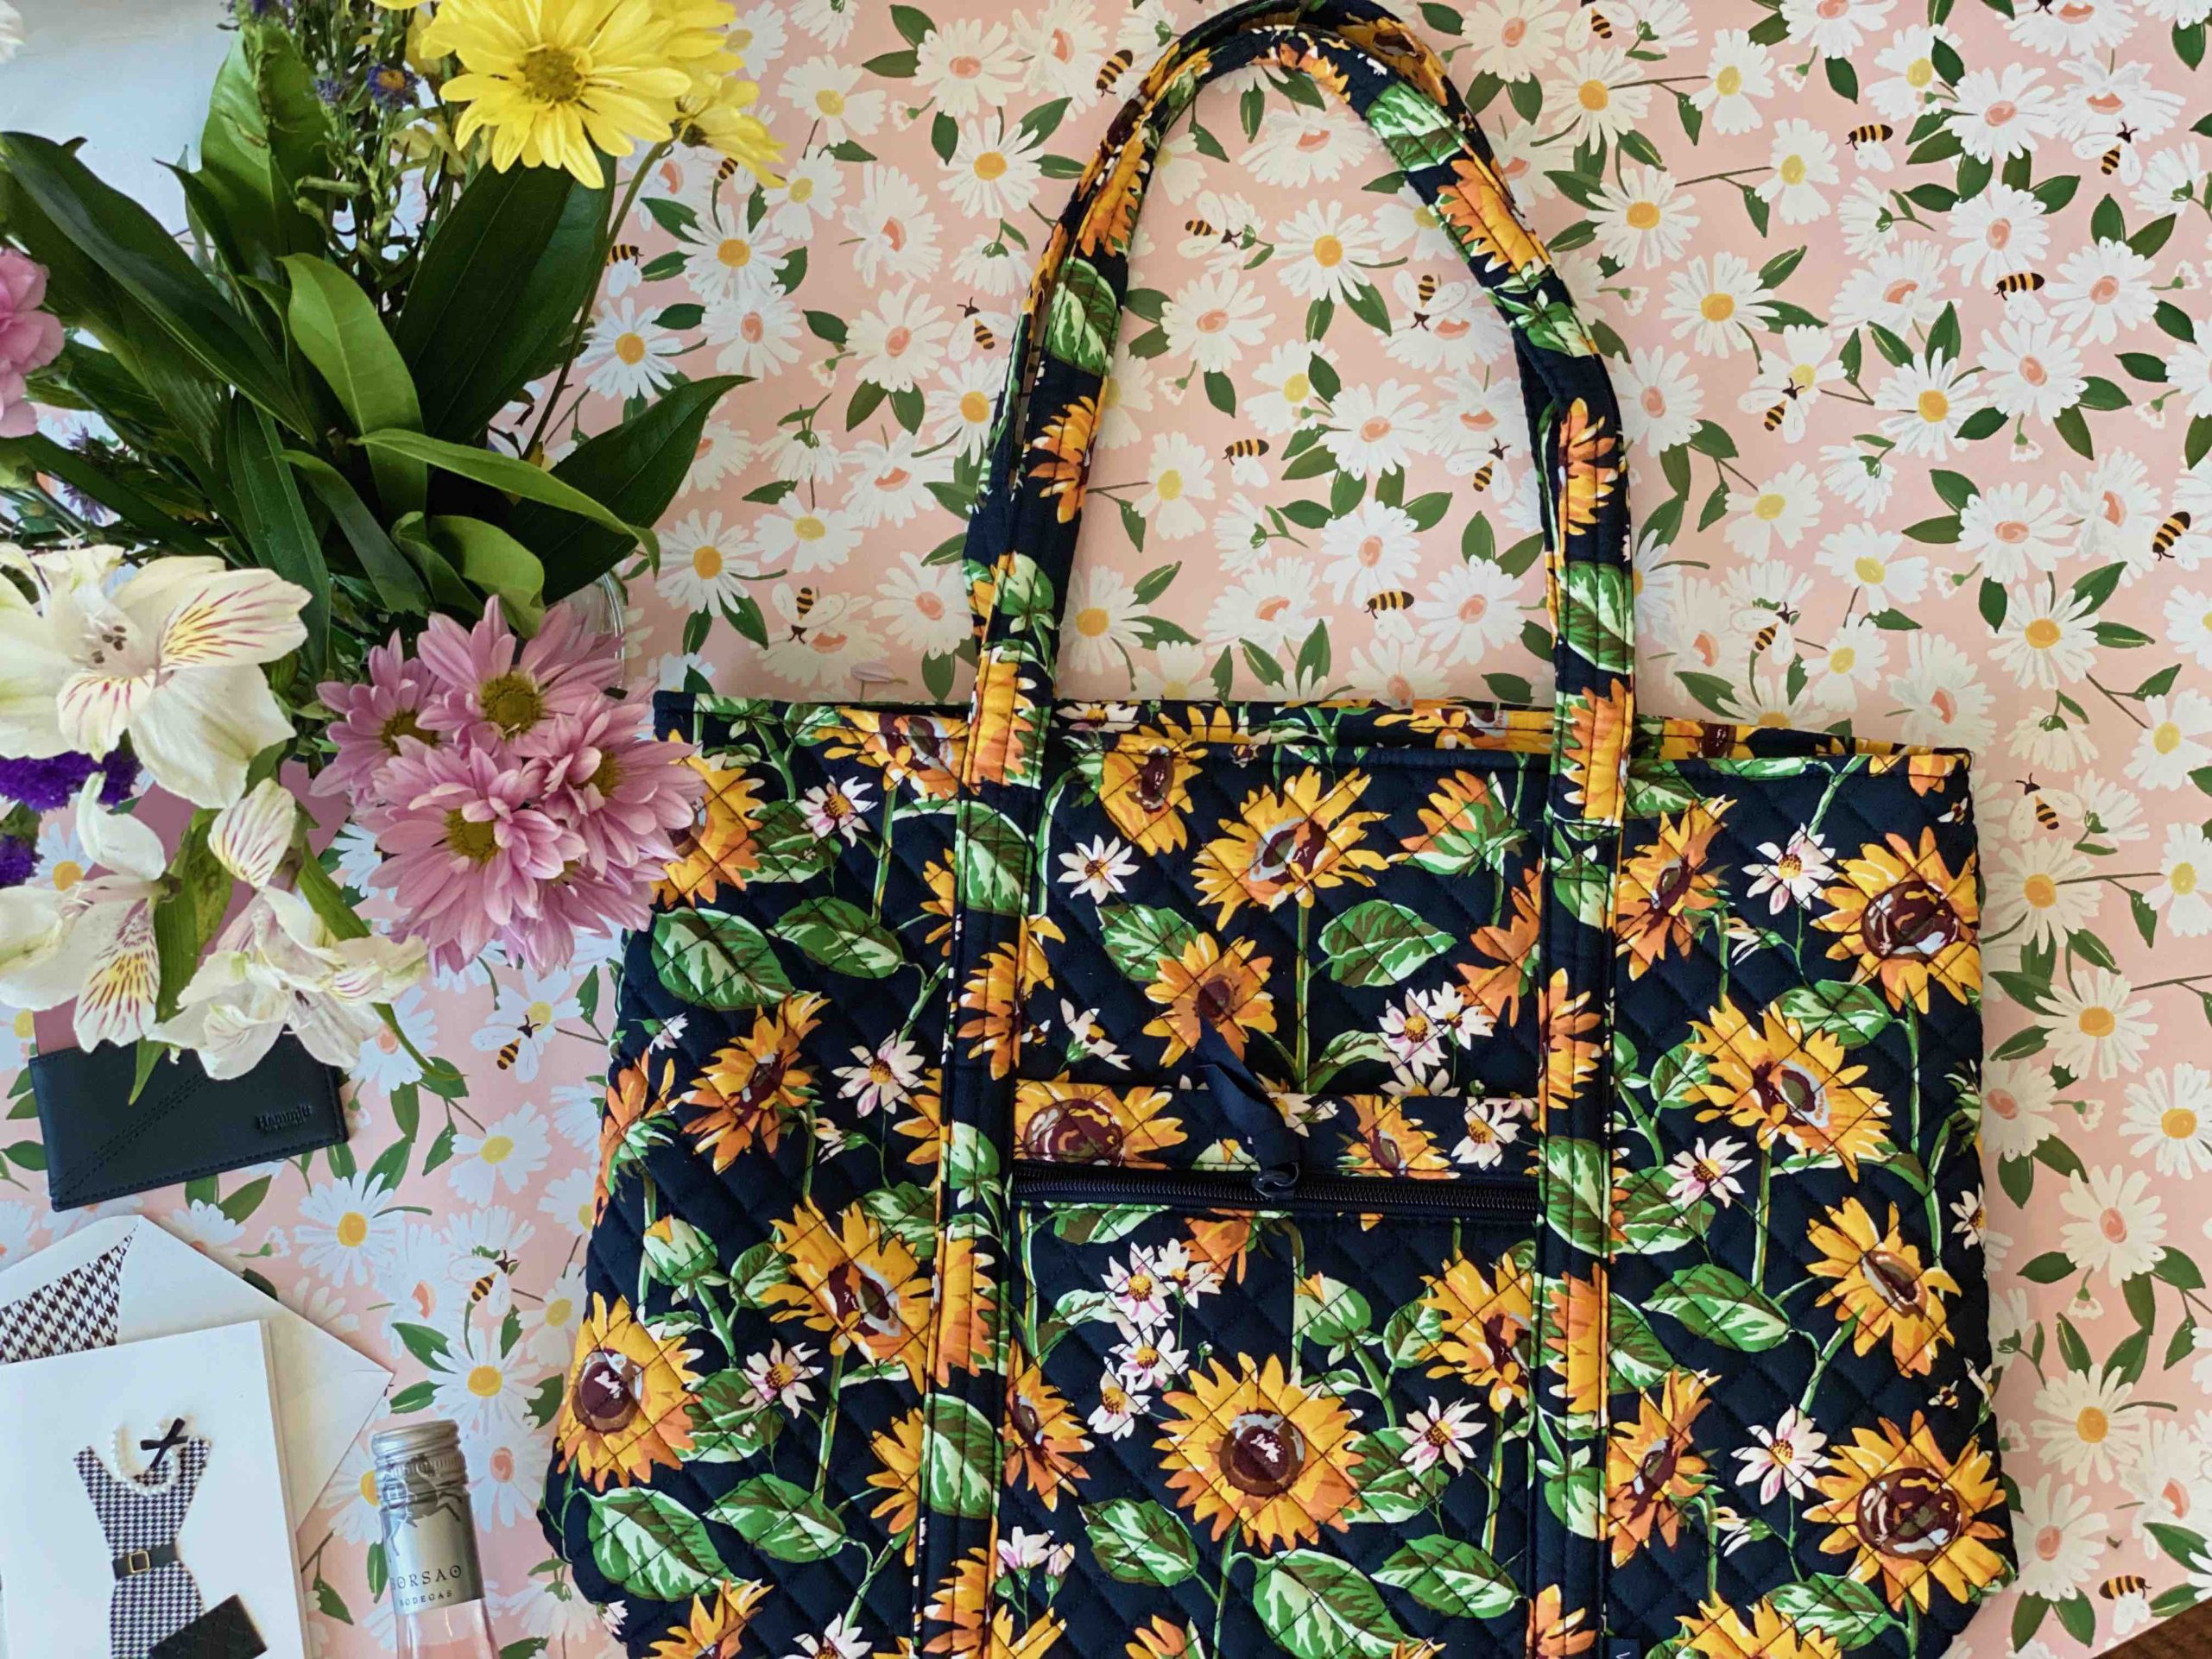 We’ve Selected The Perfect Vera Bradley Tote As An Idea For Mother’s Day